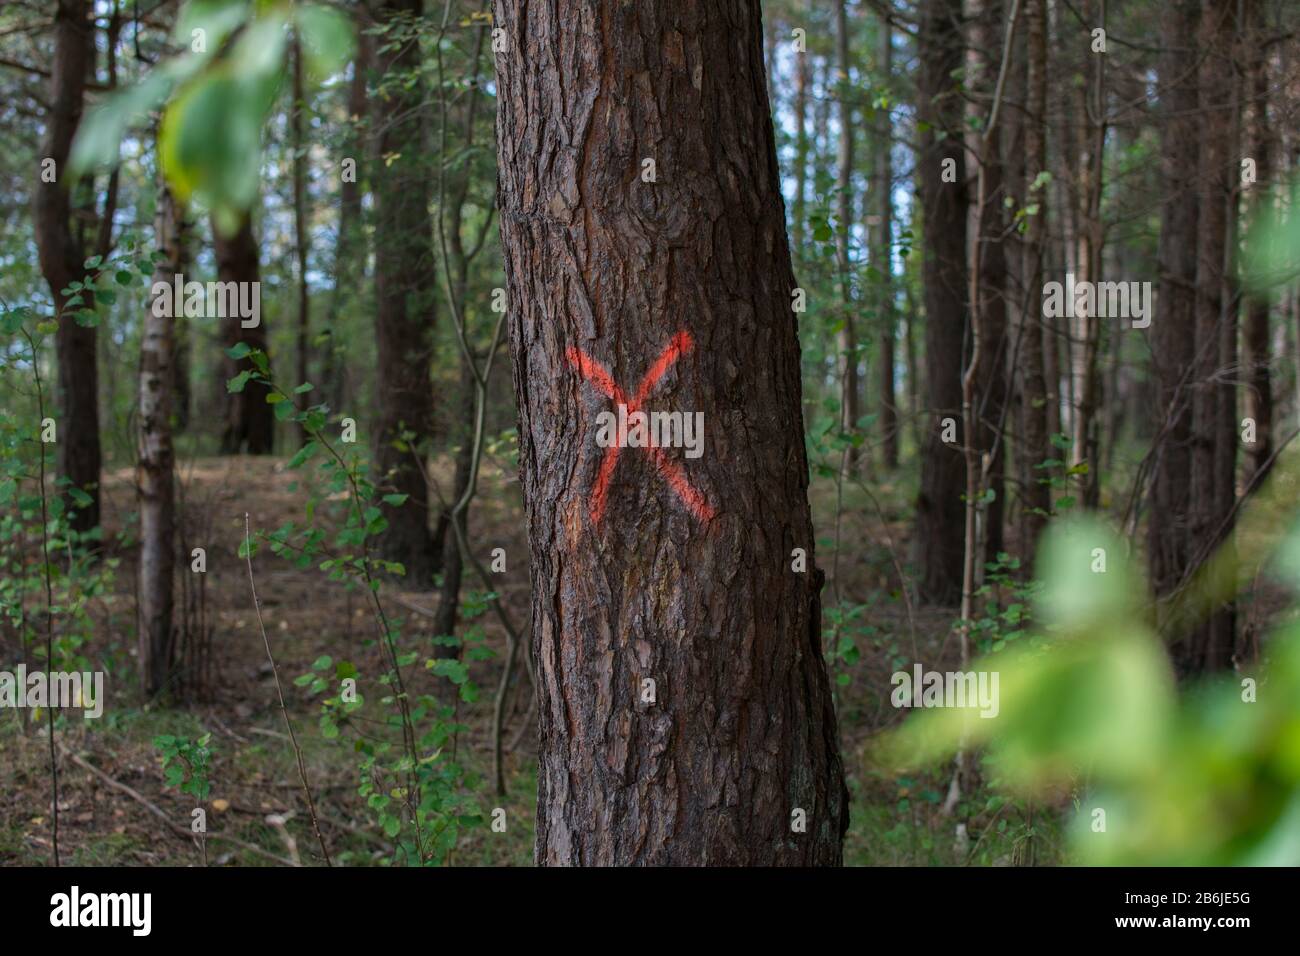 Pine tree in forest marked with red X to be cut down. Stock Photo